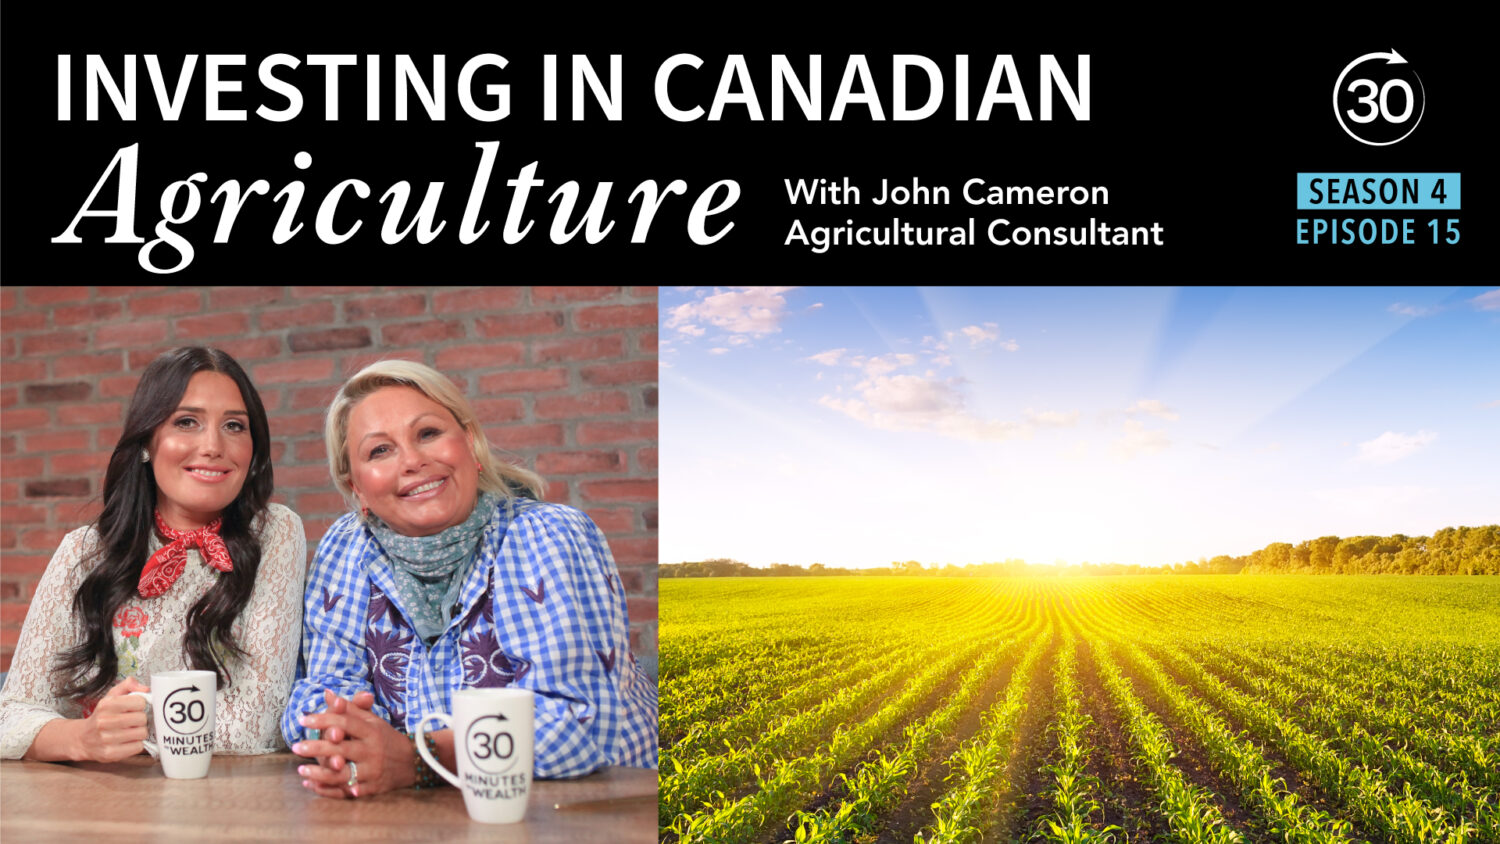 S4 E15 - Investing in Canadian Agriculture